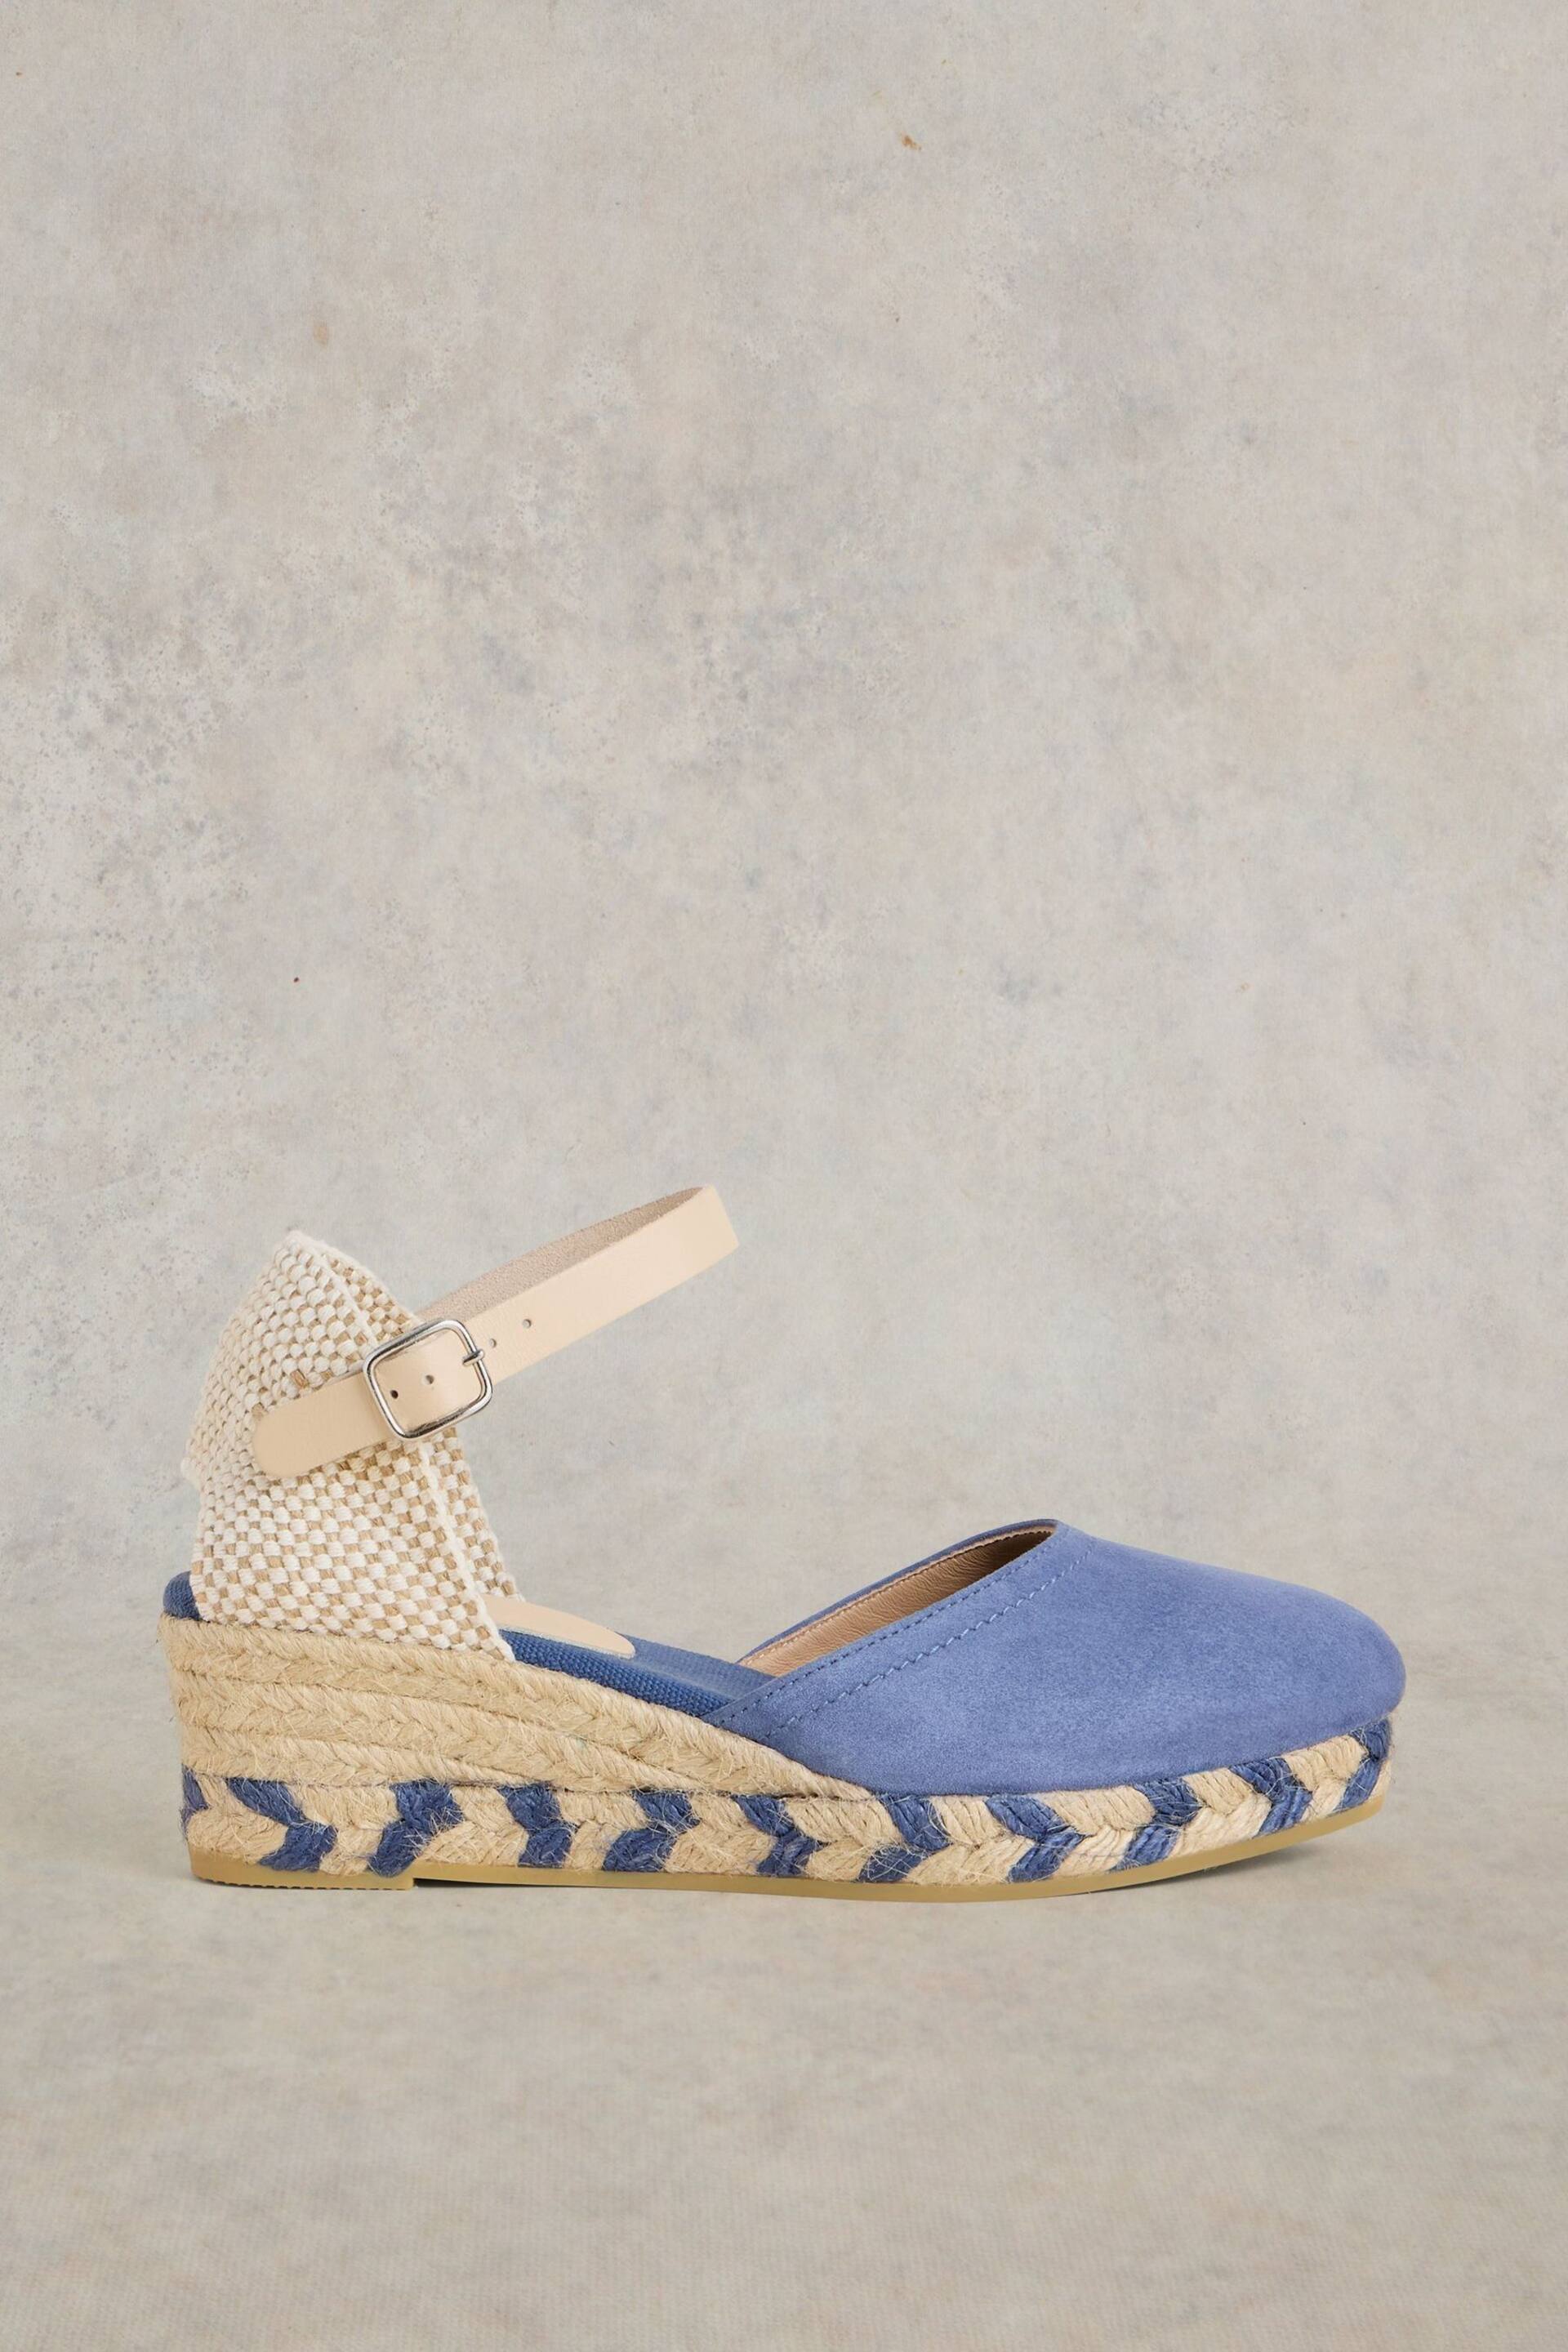 White Stuff Blue Suede Closed Espadrille Wedges - Image 1 of 4